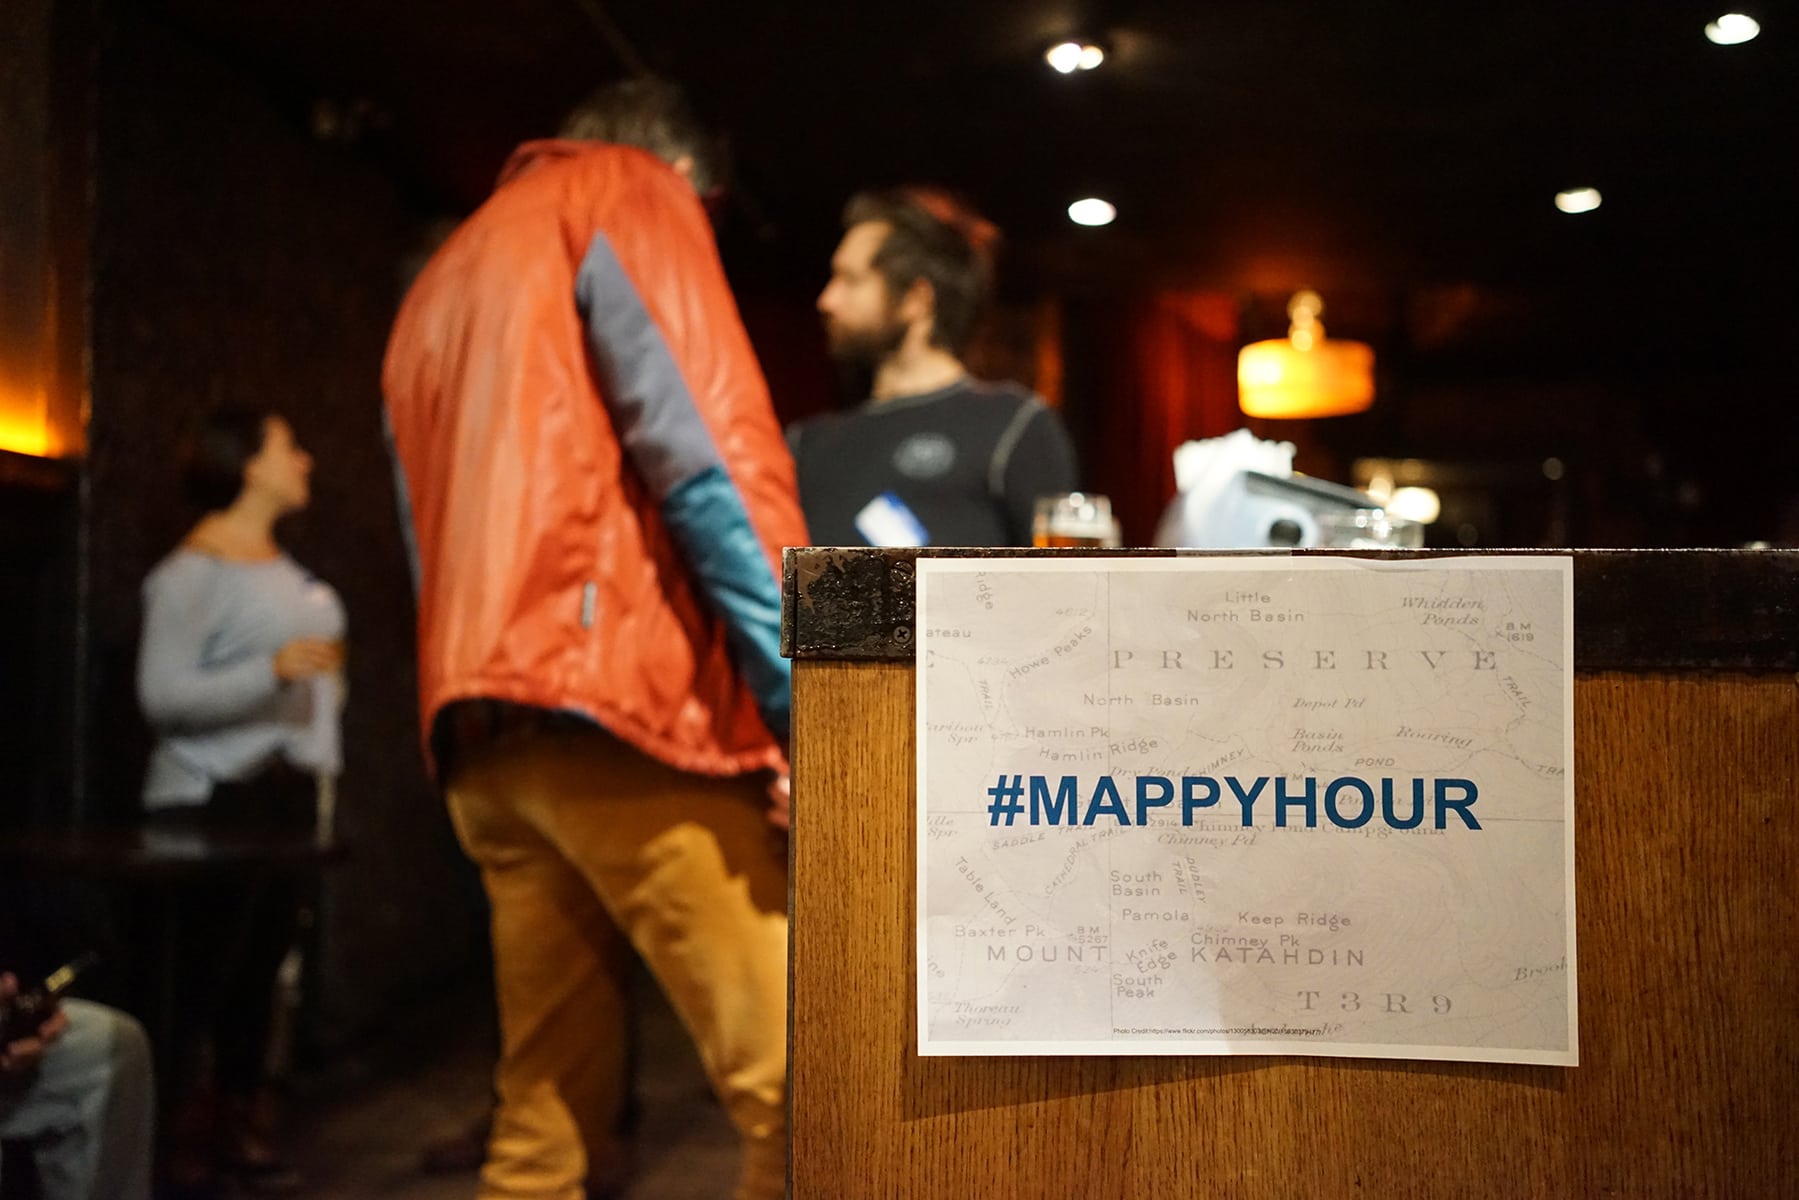 Mappy Hour hashtag by Horace